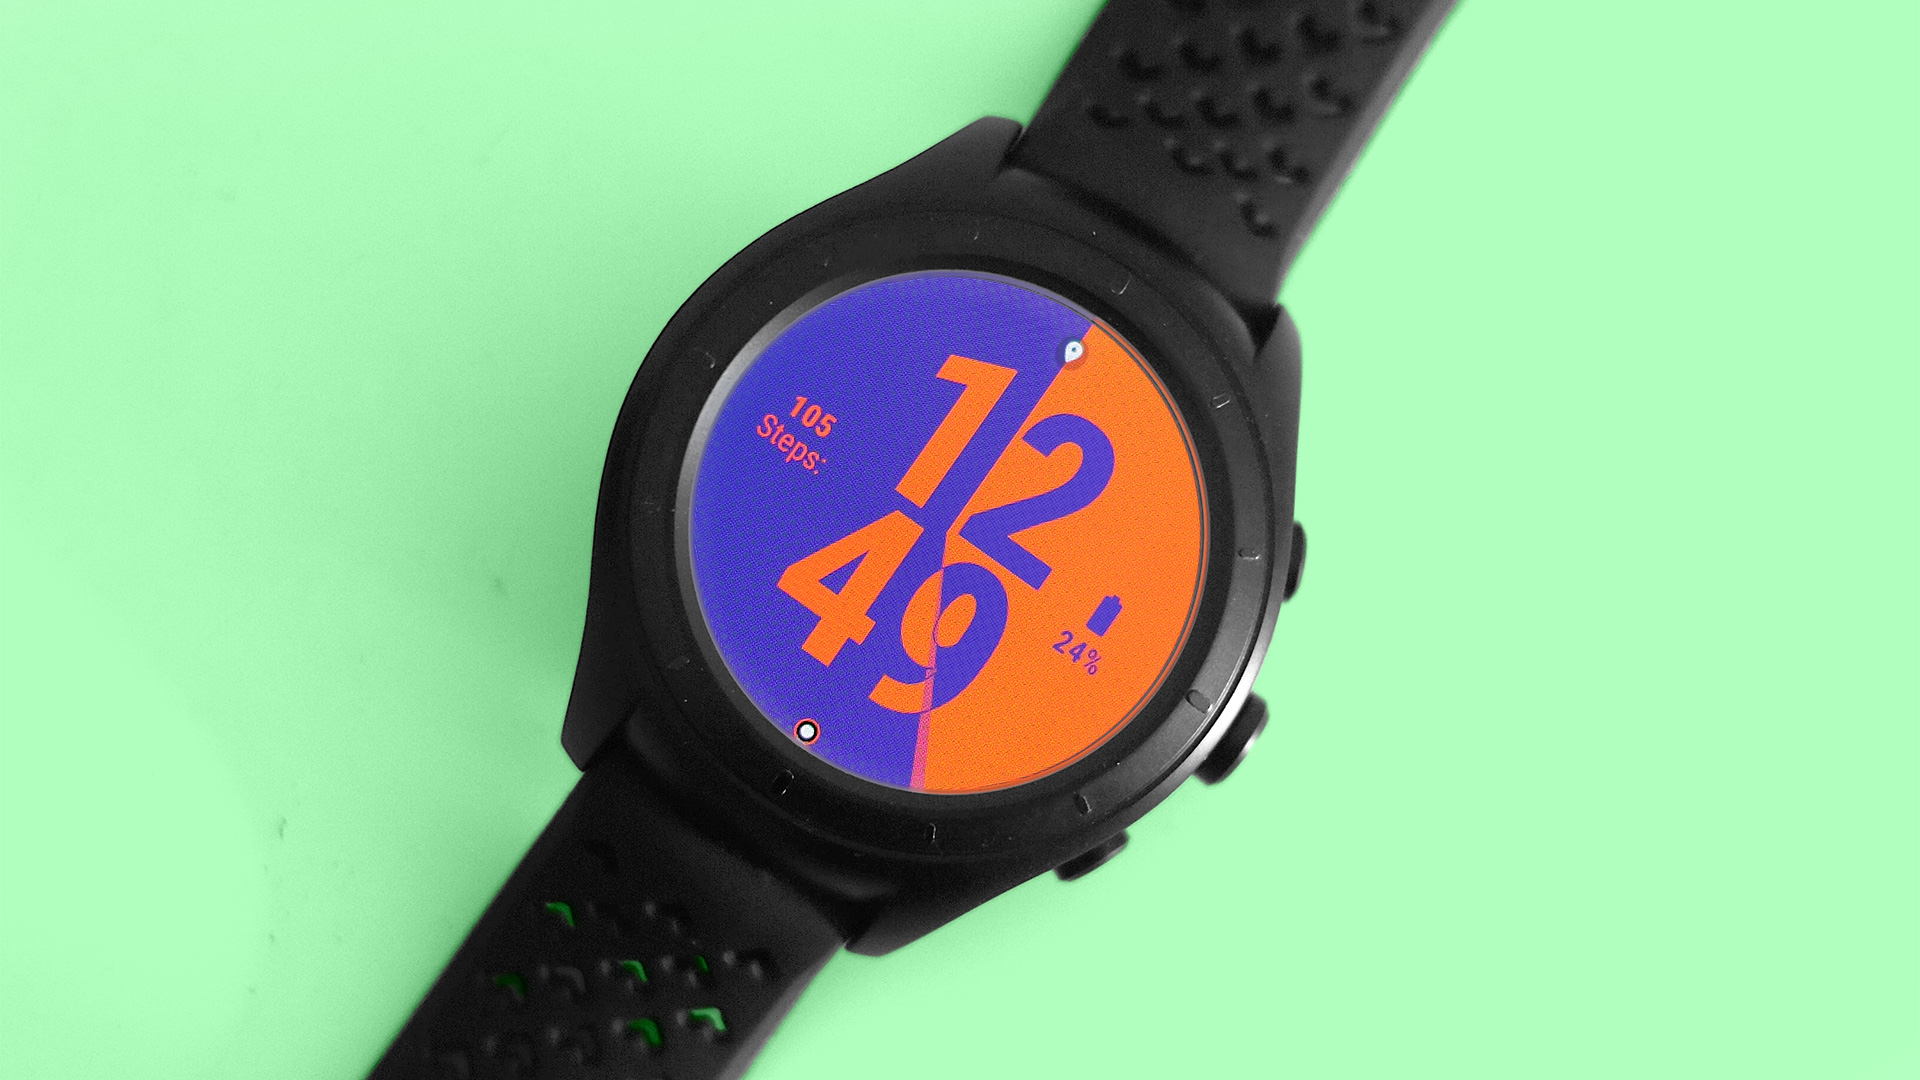 Best Wear OS watch faces great looks for your smartwatch TechRadar